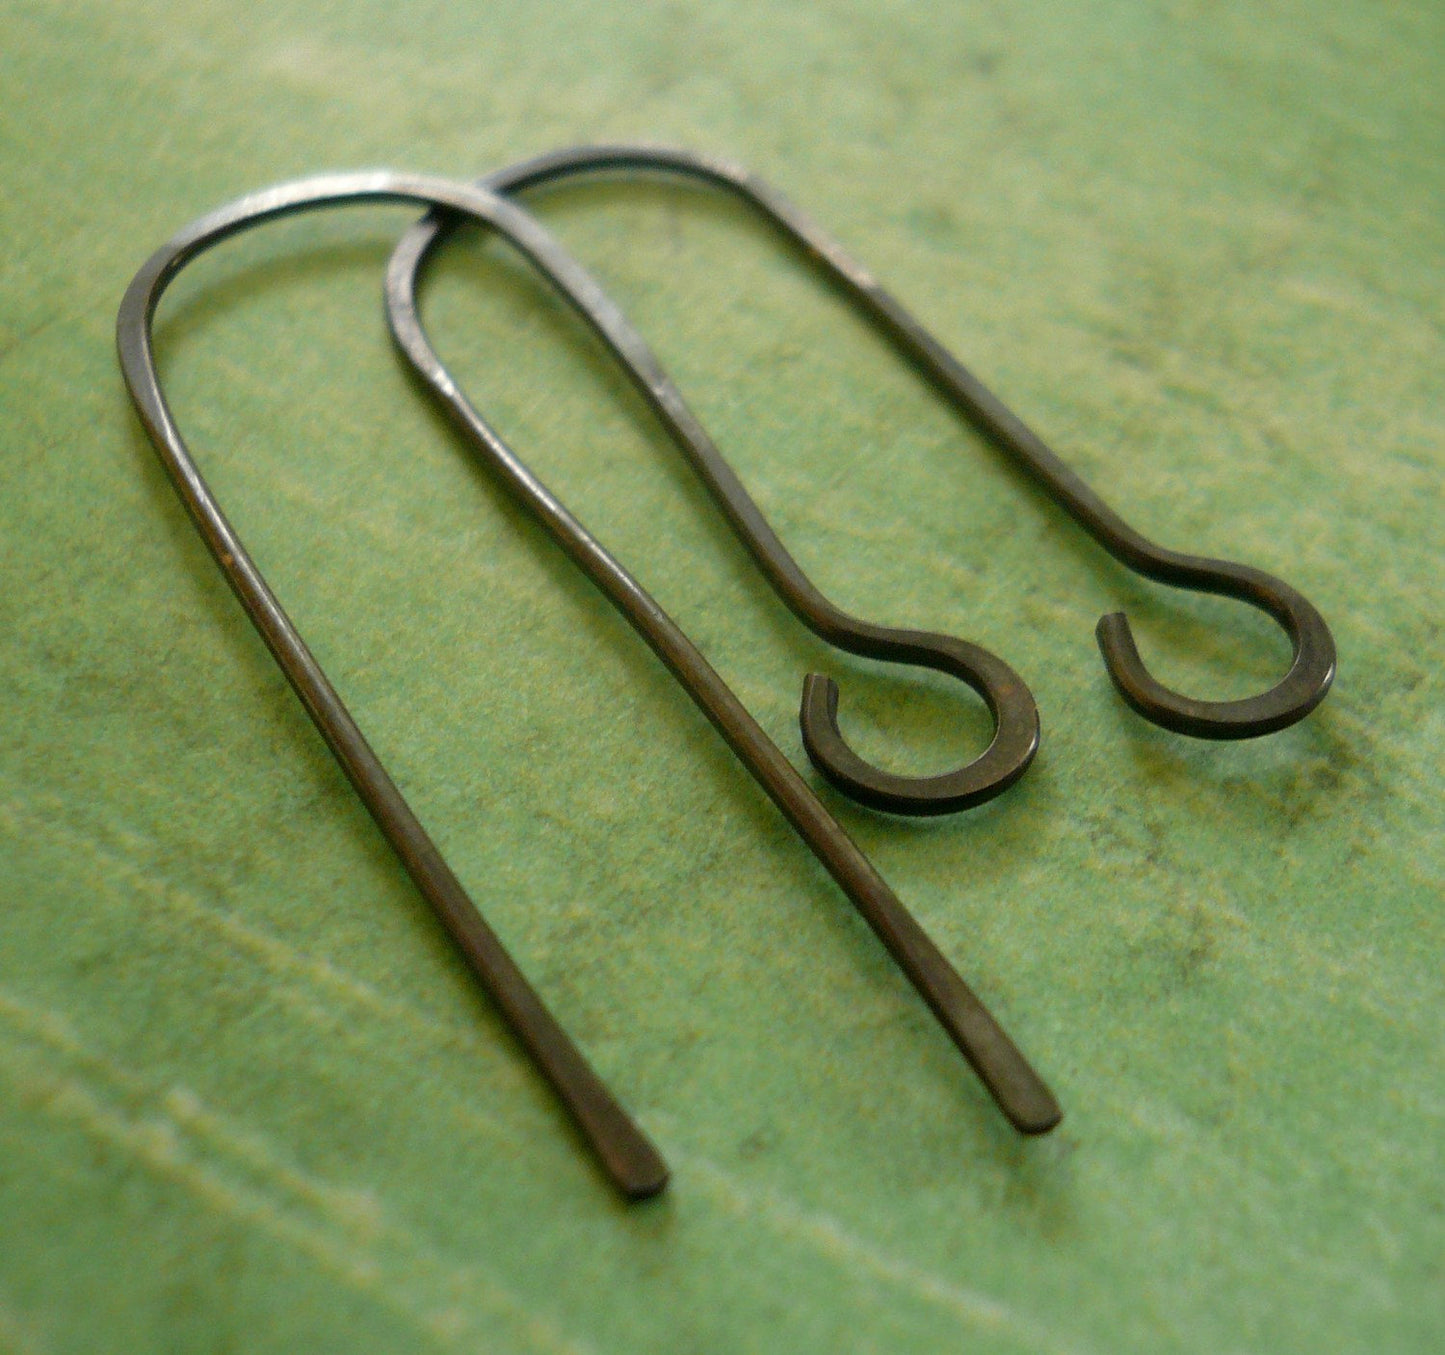 Minimalist Sterling Silver Earwires - Handmade. Handforged. Heavily Oxidized